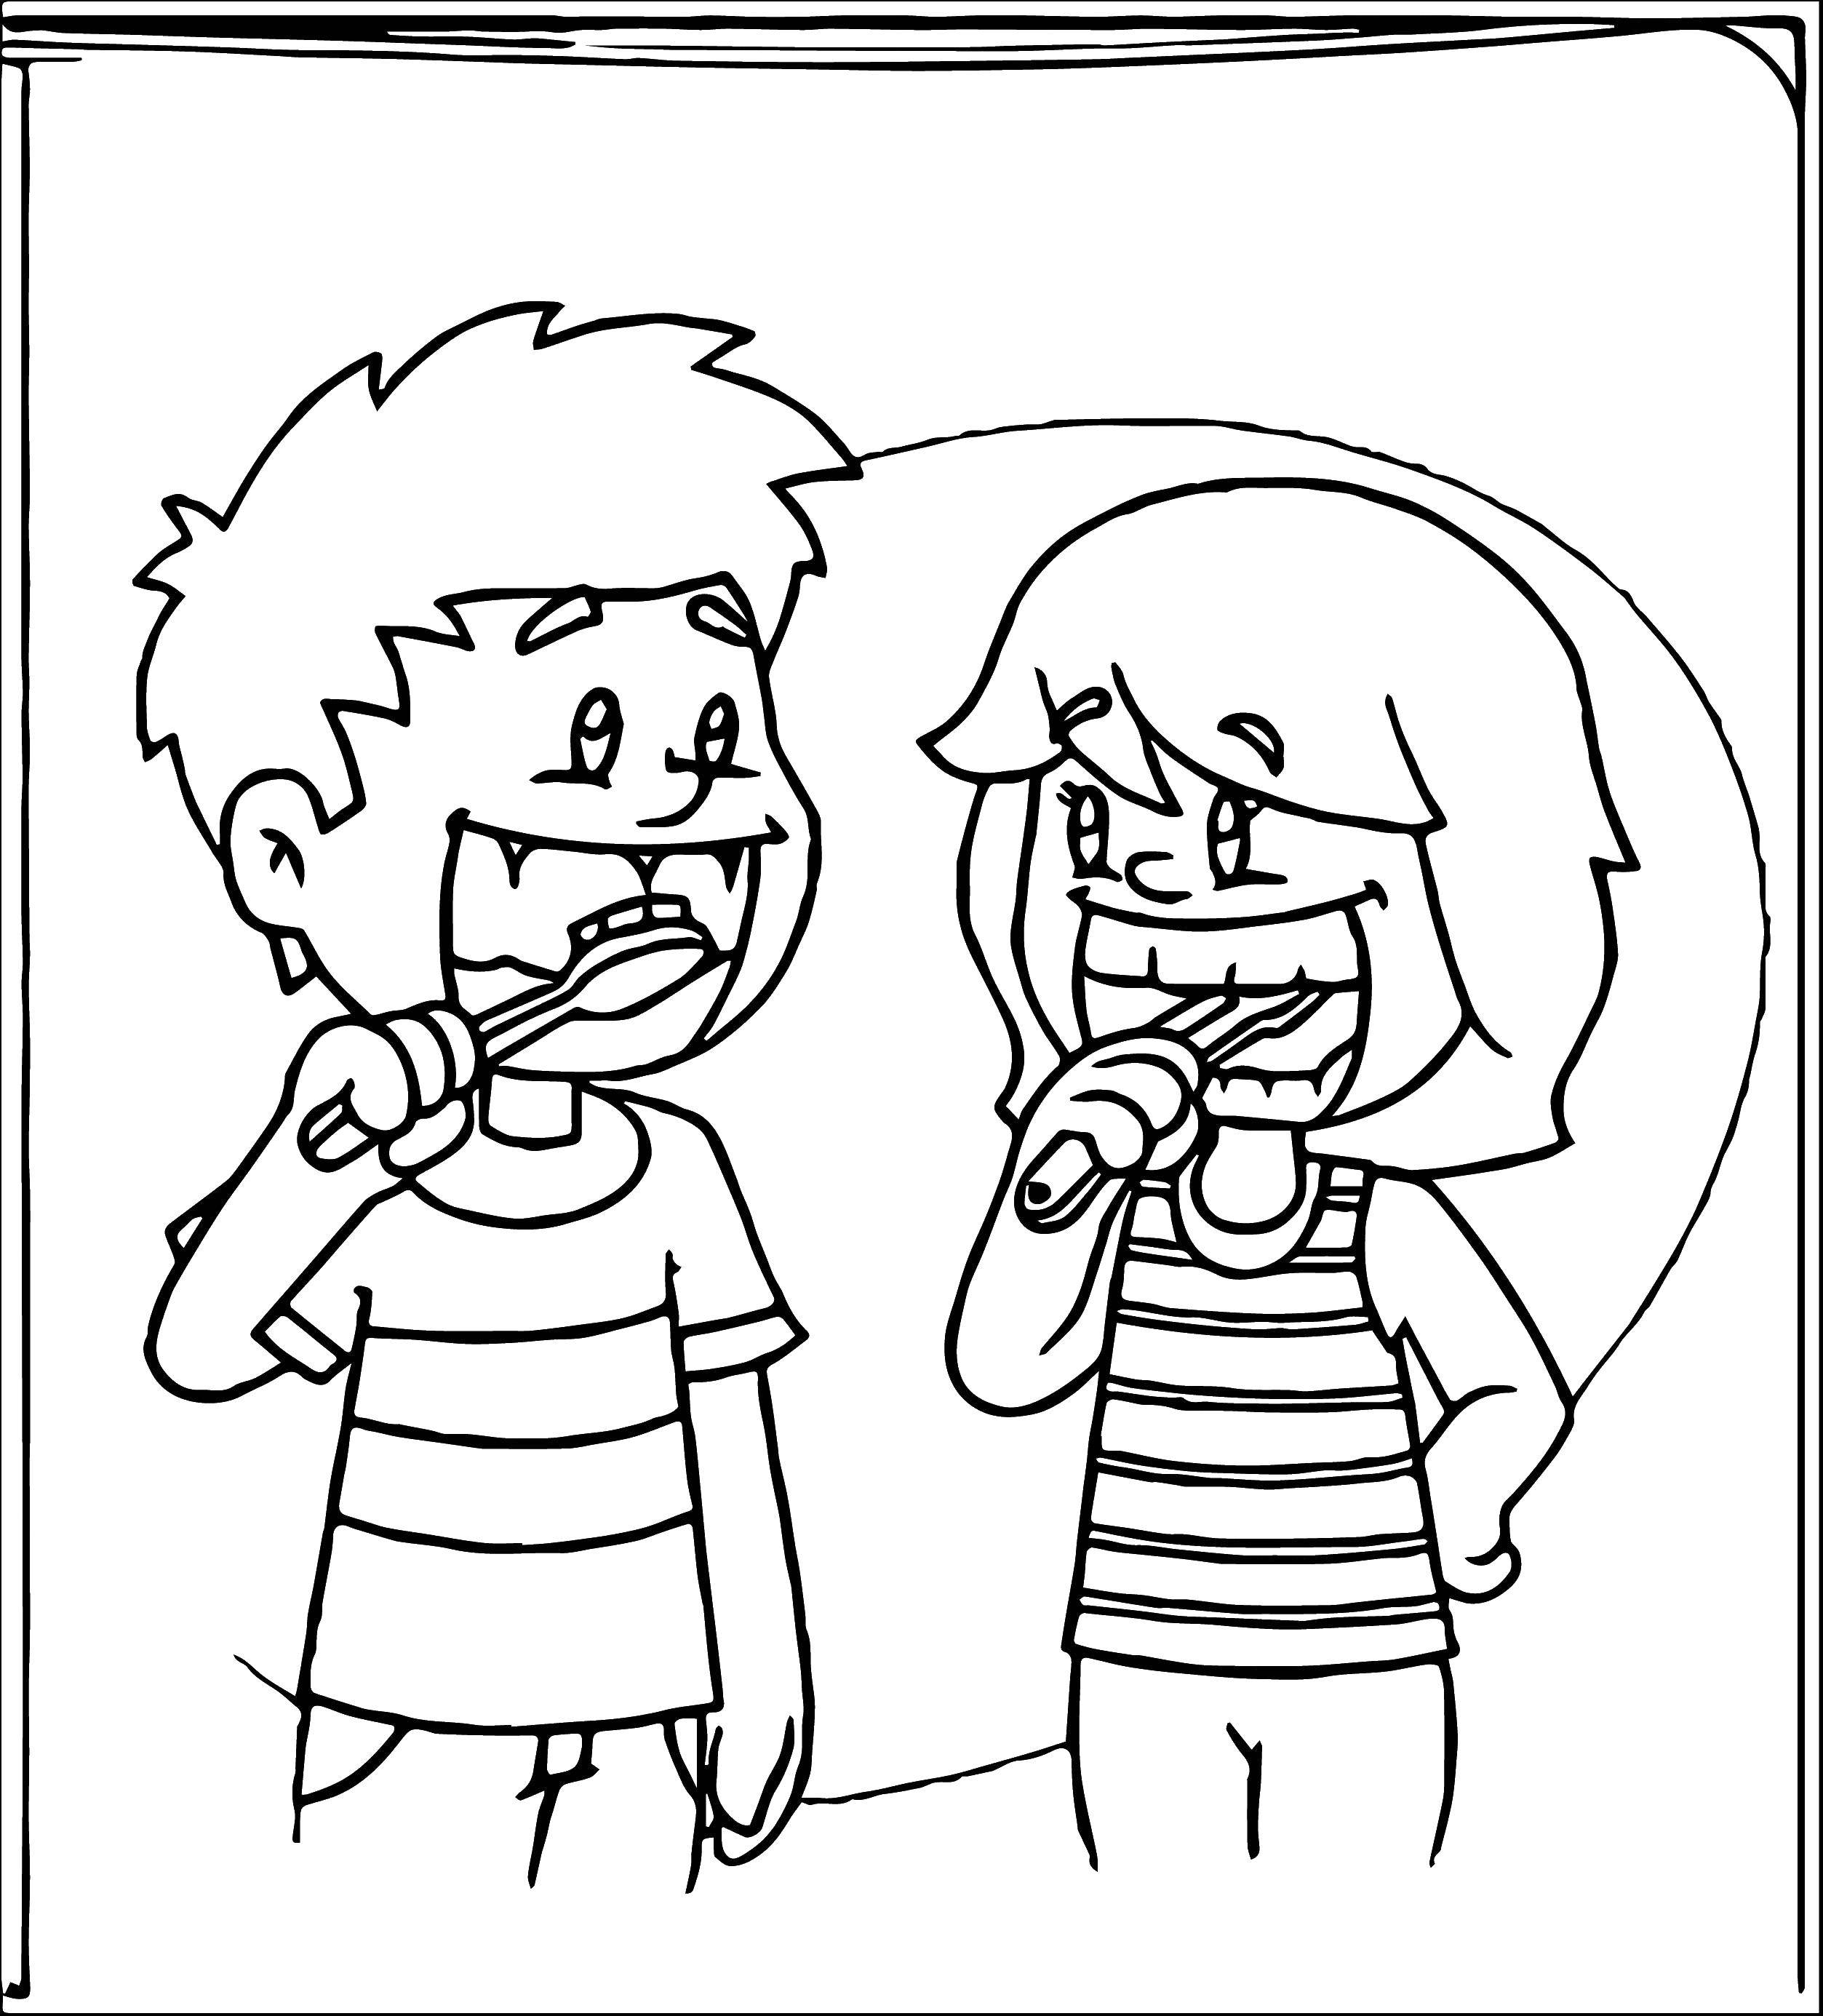 Coloring Boy and girl brushing teeth. Category The care of teeth. Tags:  The care of teeth.